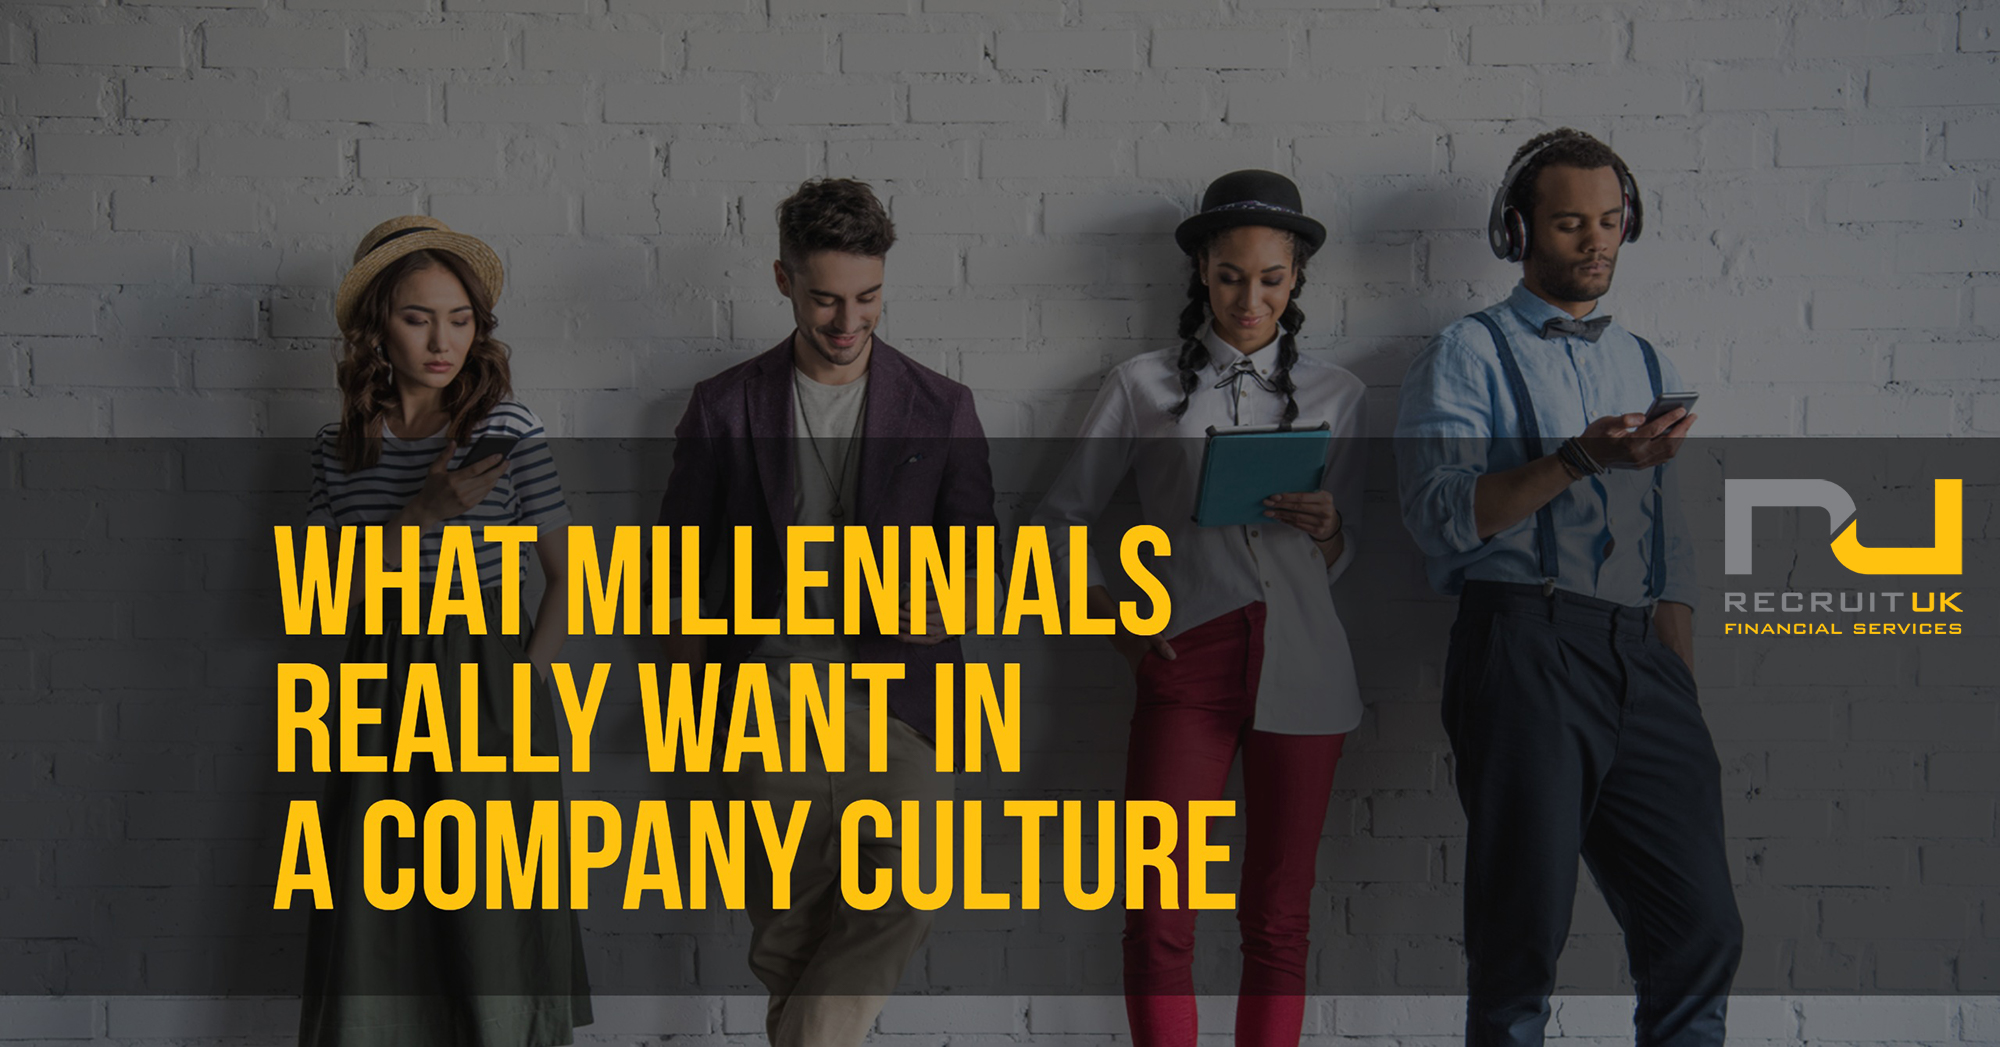 Image of 4 people standing against a wall with the words 'What millennials really want in a company culture'